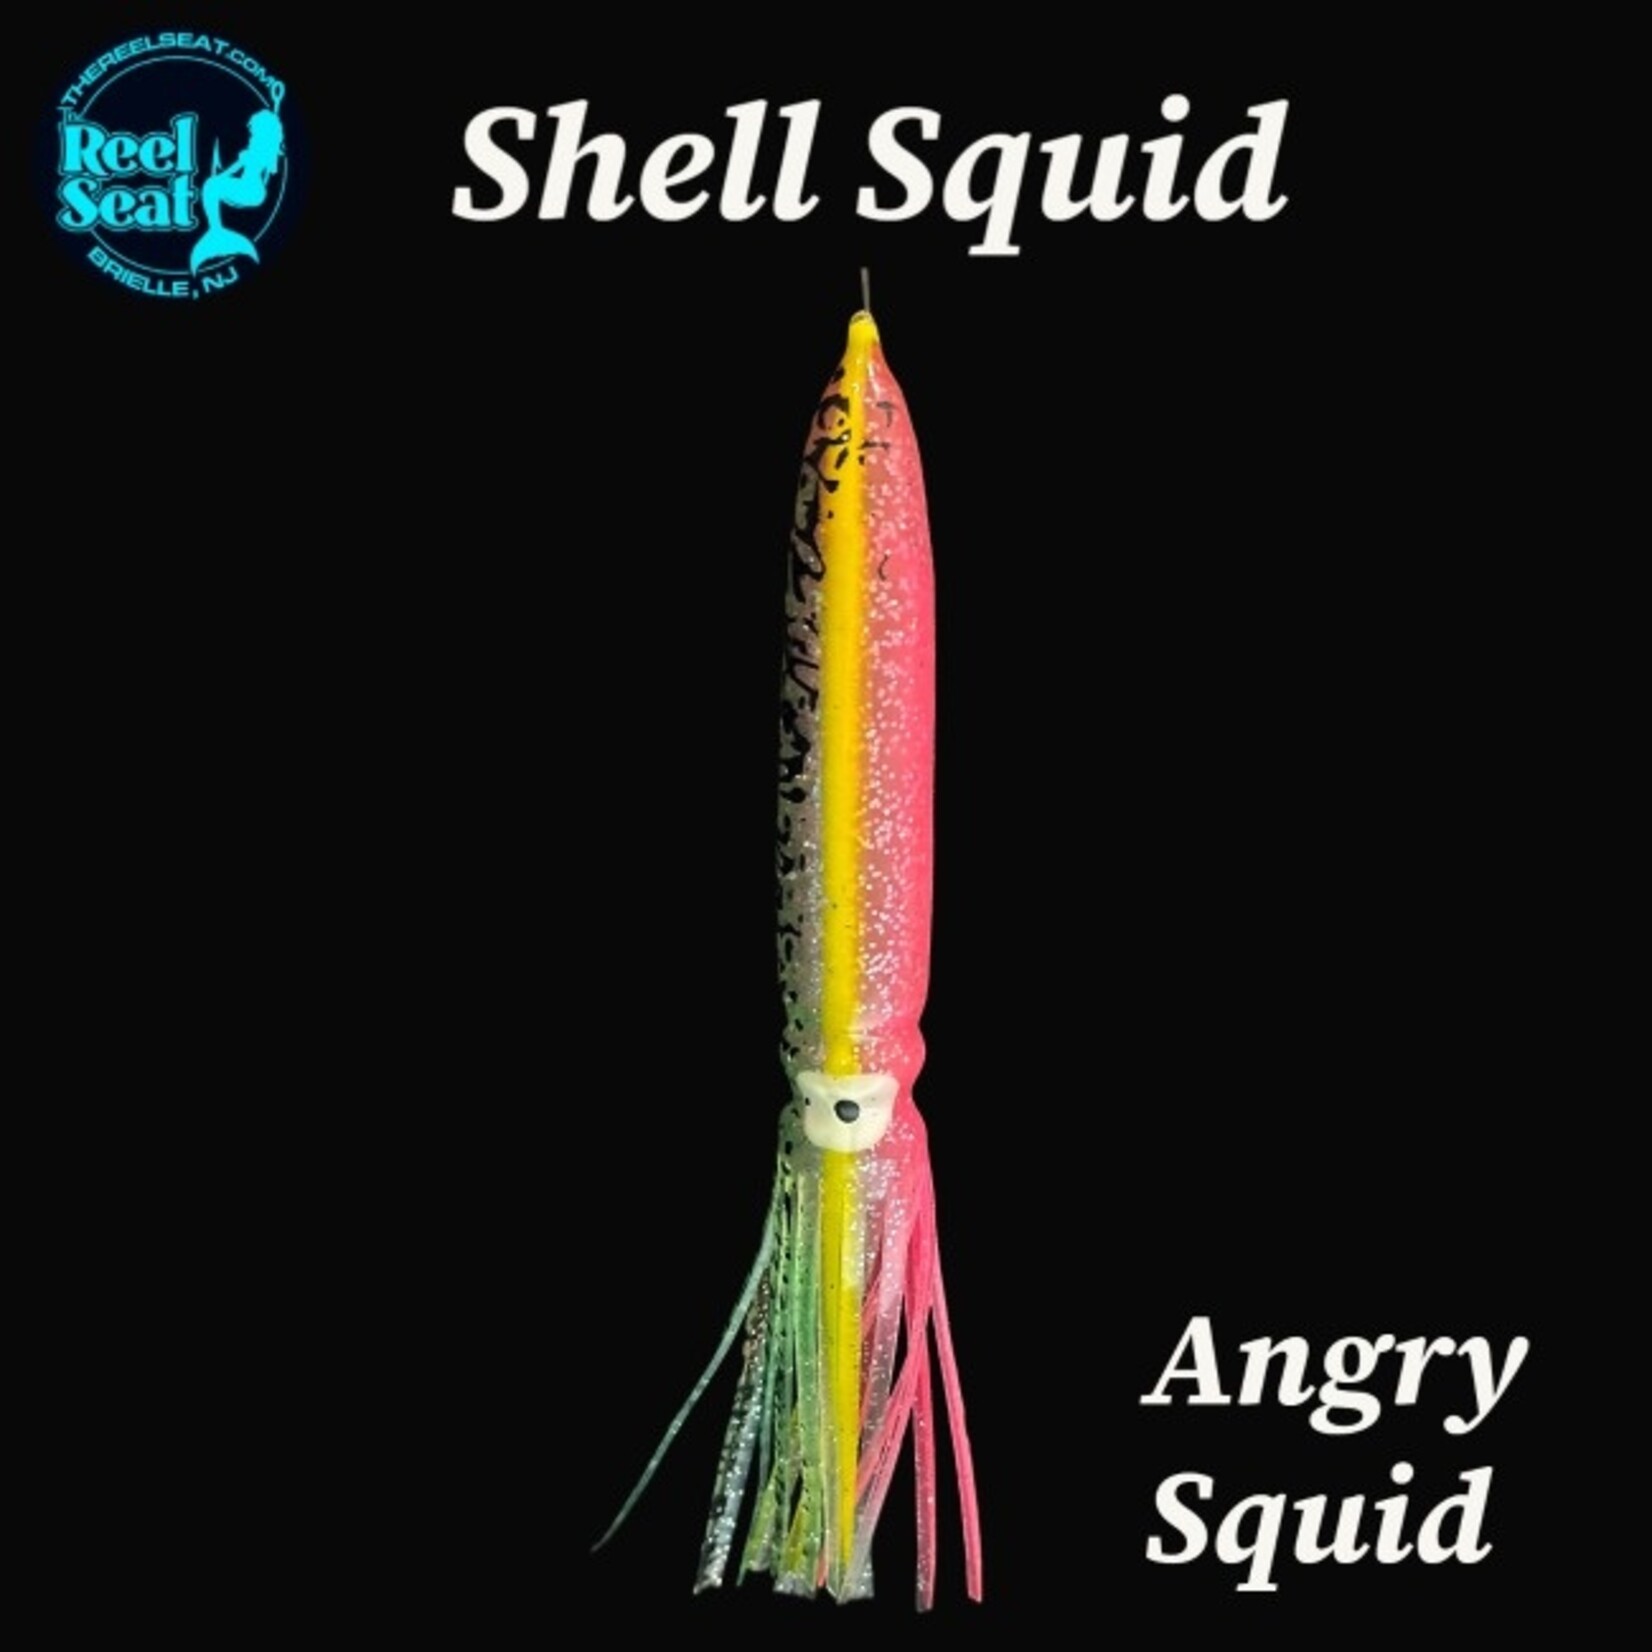 The Reel Seat RS SHELL SQUID